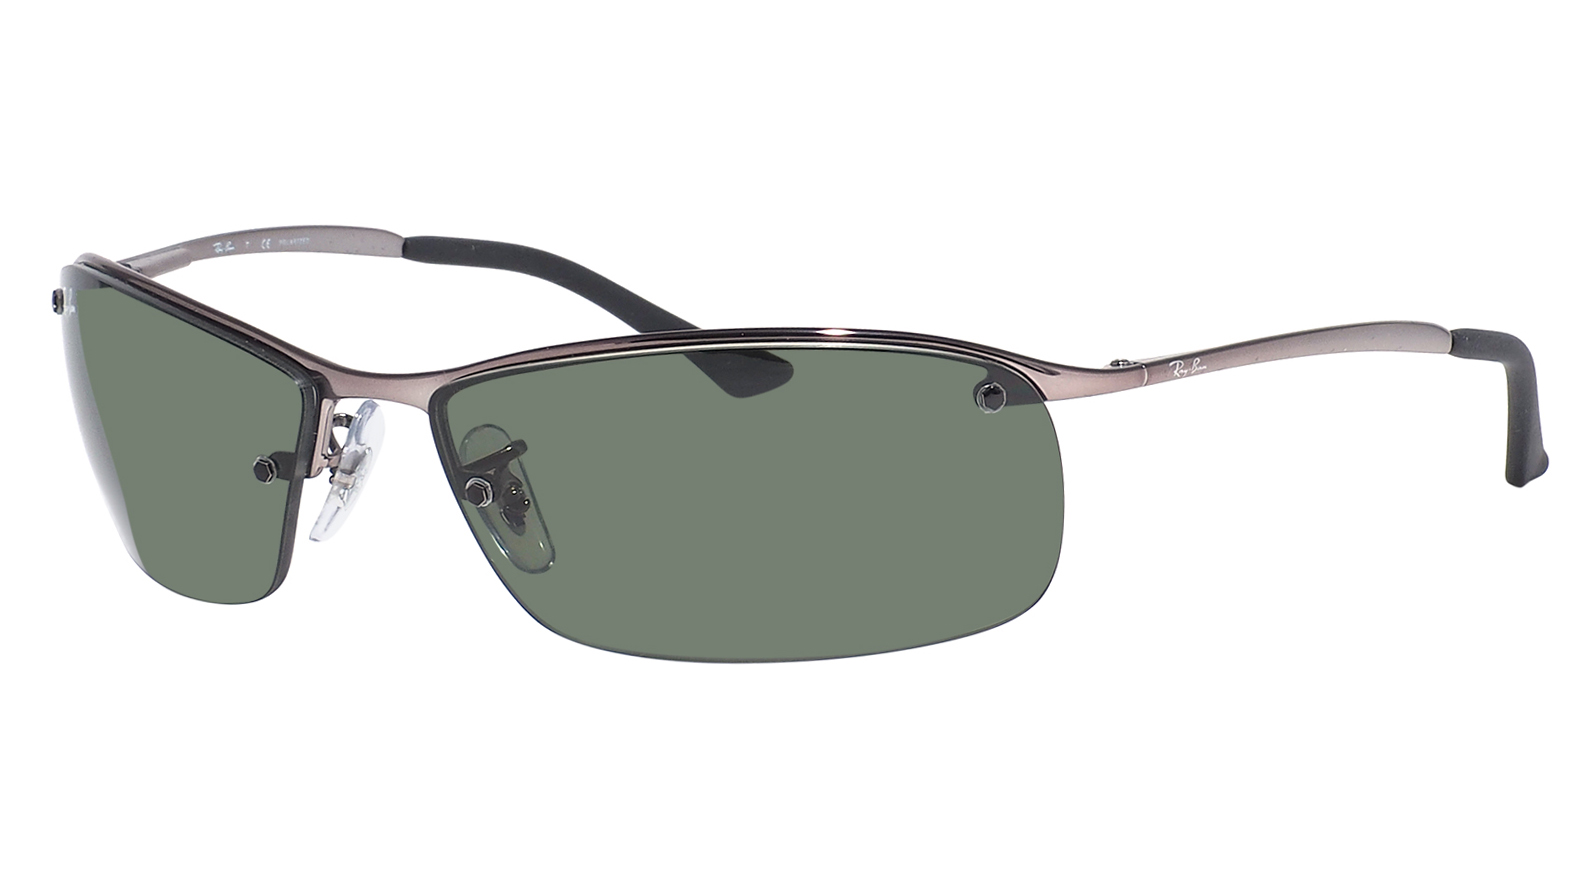 Ray-Ban Active Lifestyle RB 3183 004/9A ray ban active lifestyle rx 7047 5847